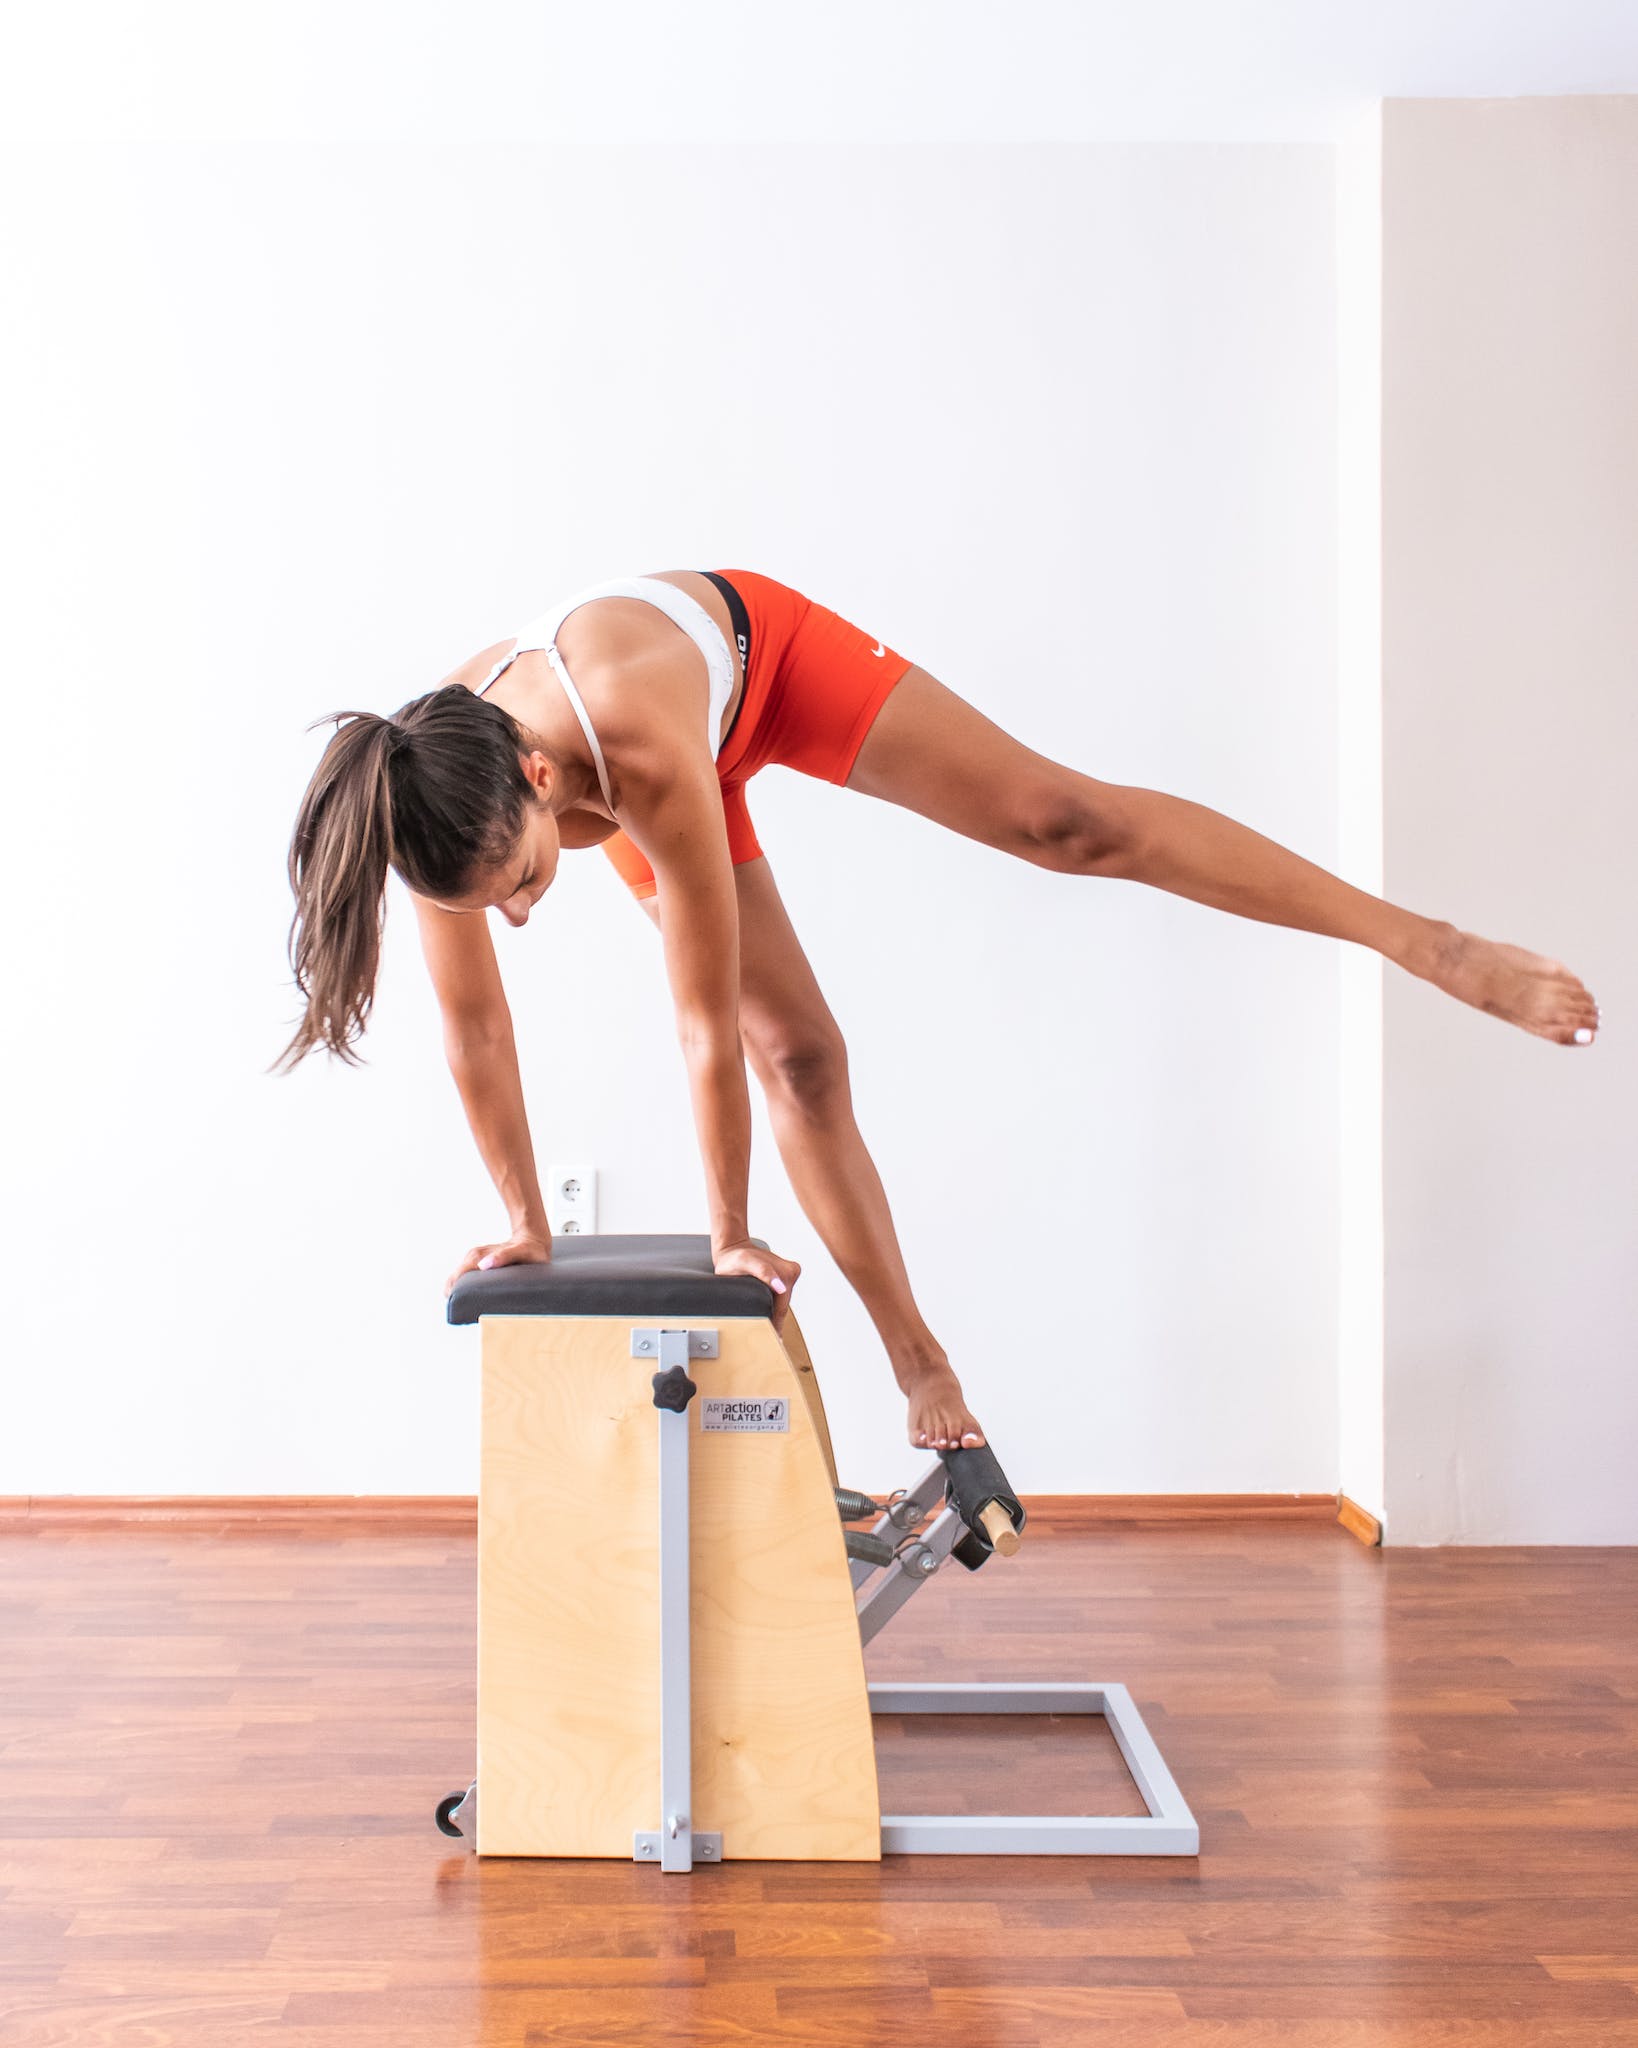 A Woman in Activewear Doing Pilates Reformer Exercise